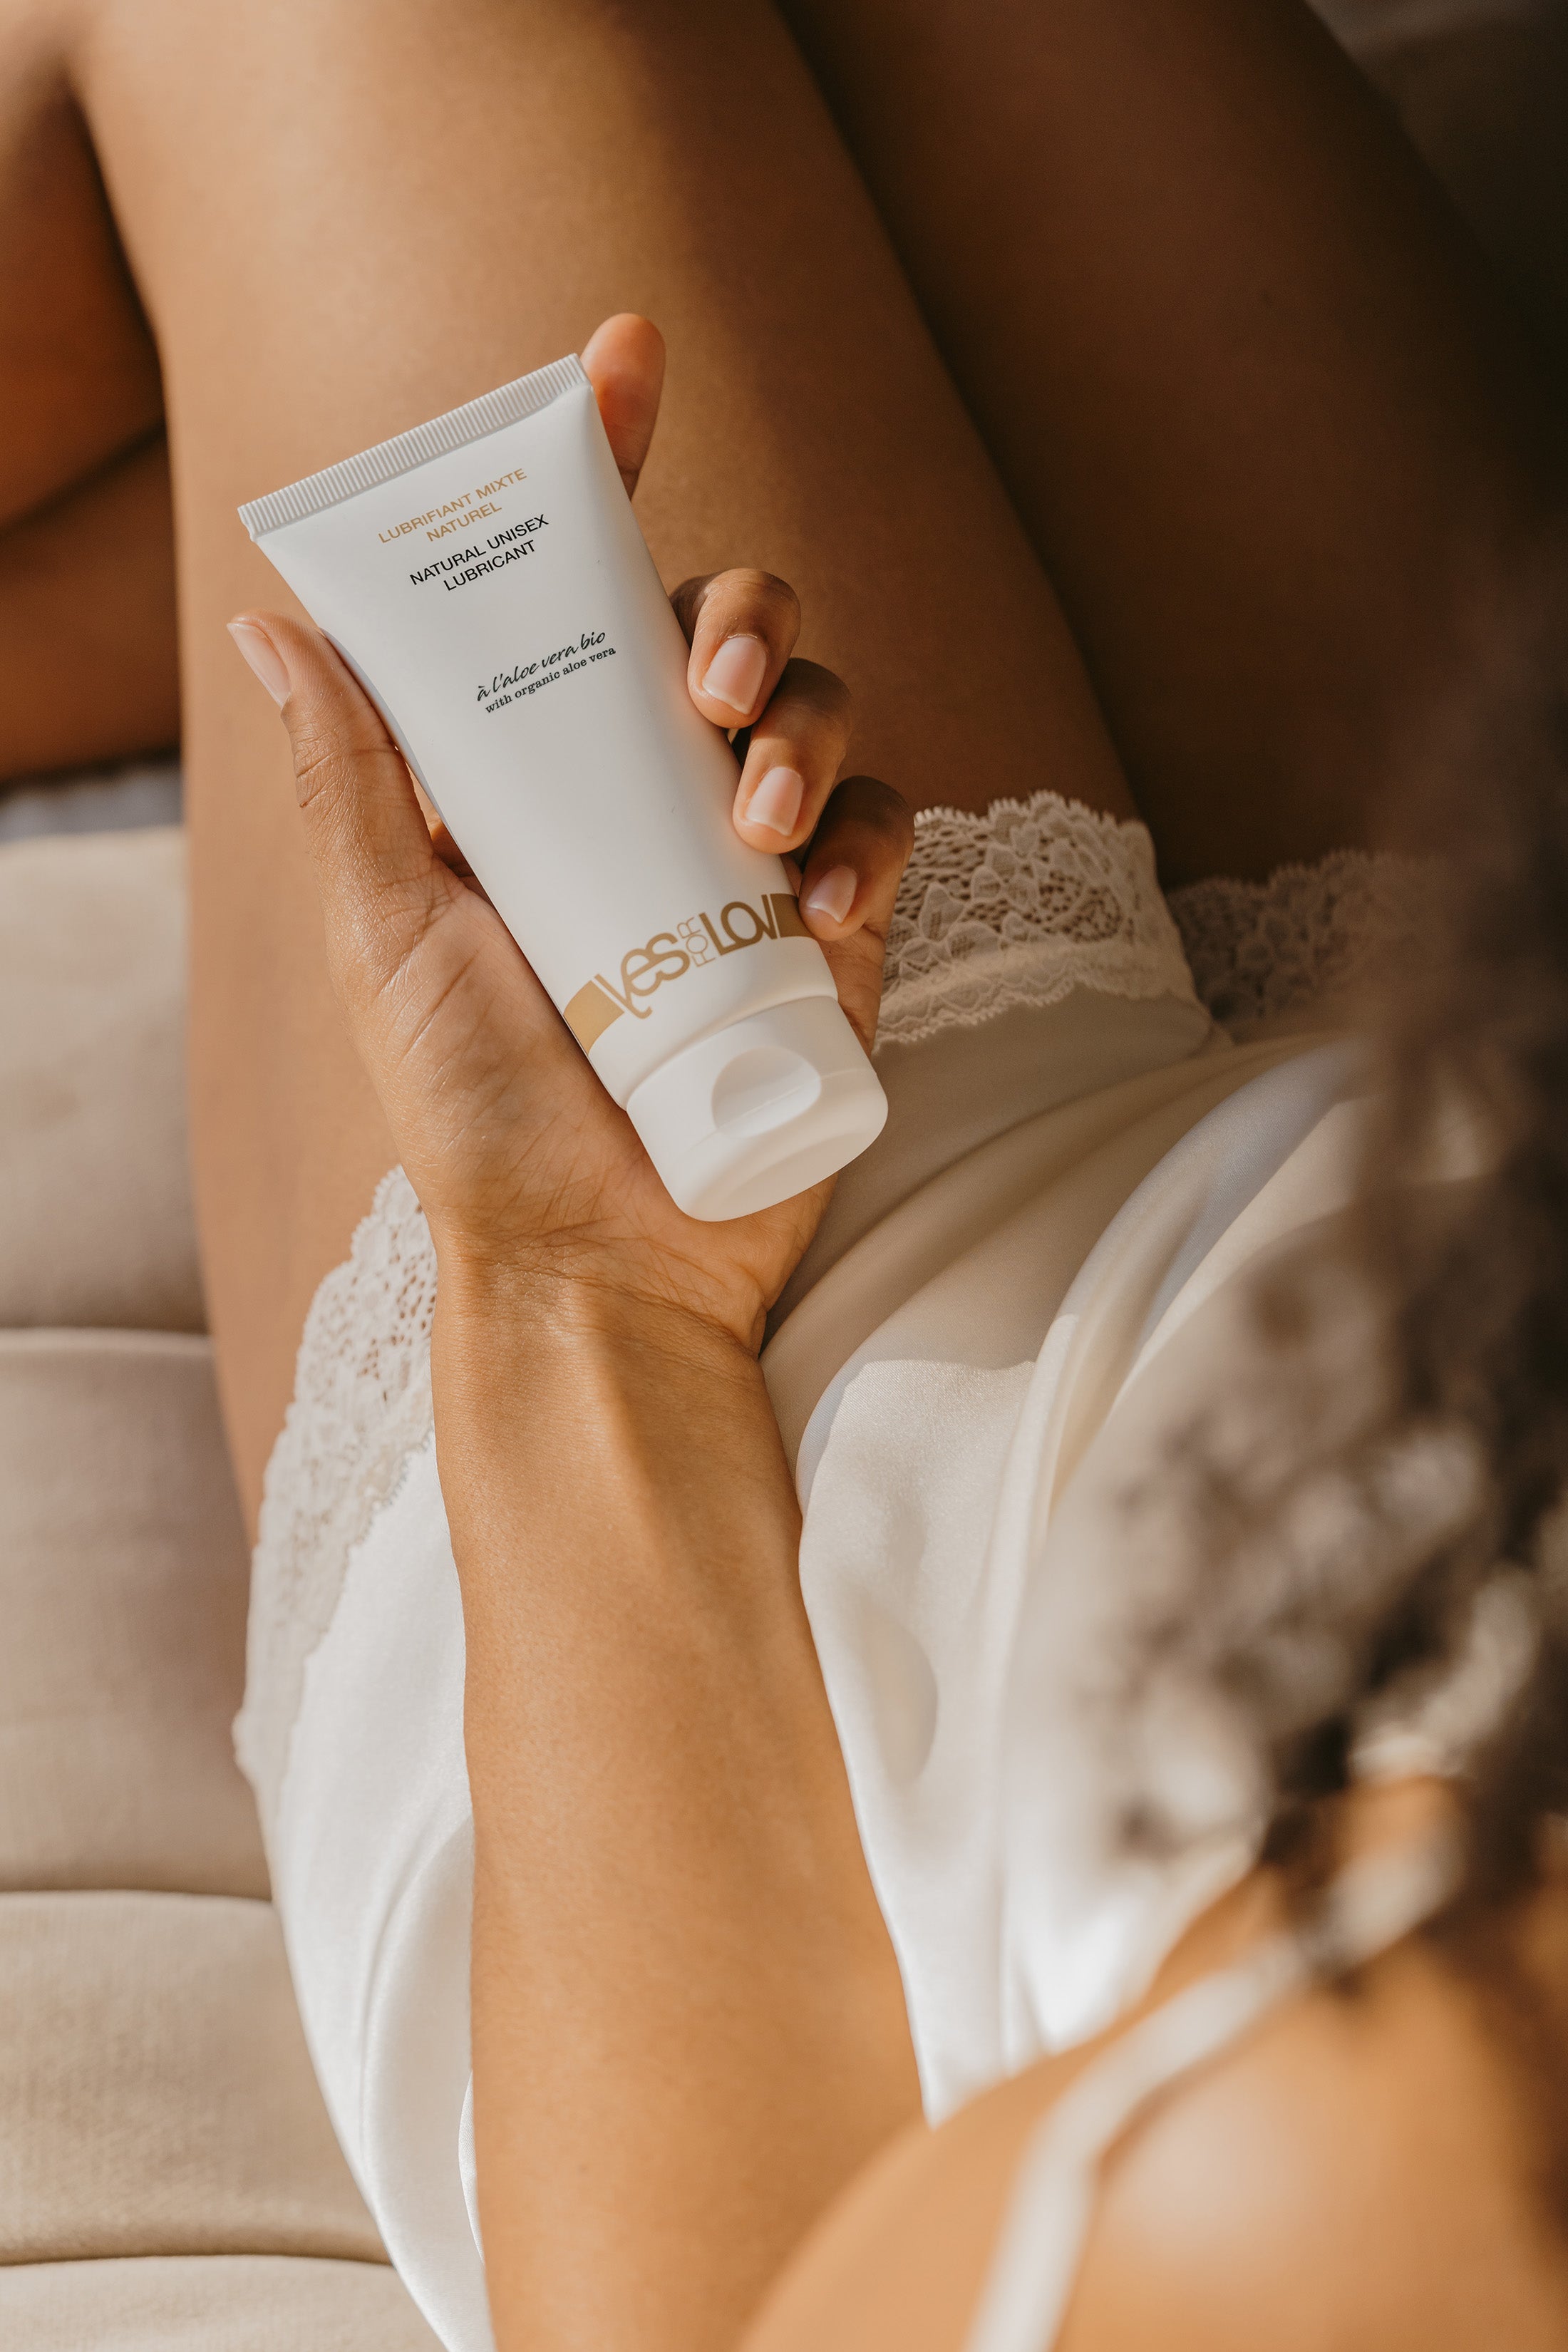 OUR 7 ESSENTIAL REASONS TO USE AN INTIMATE LUBRICANT GEL